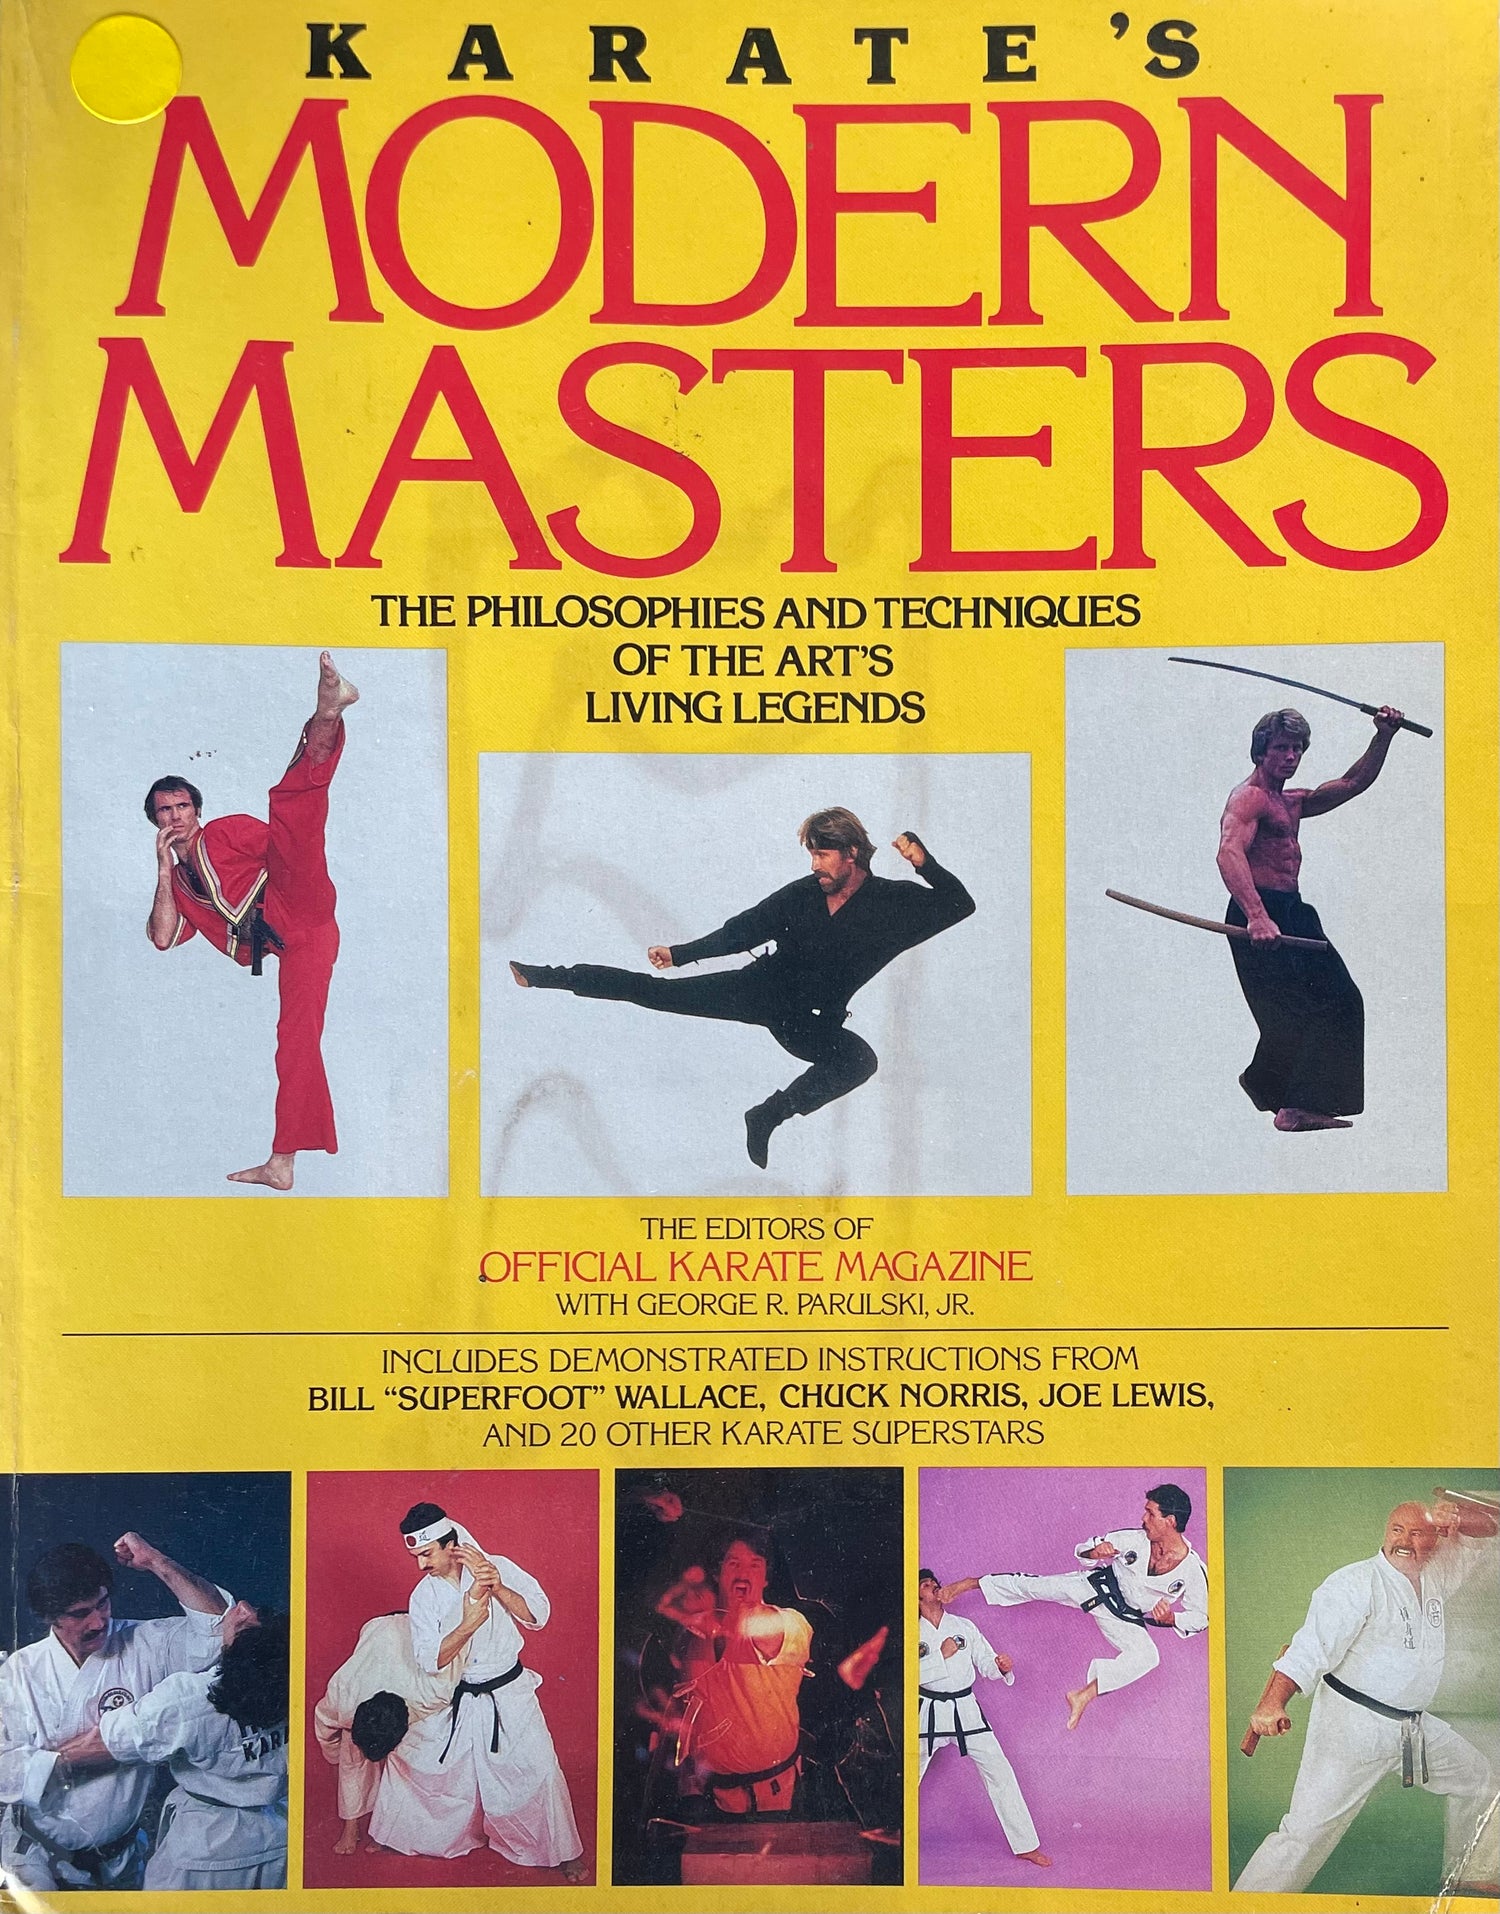 Karate's Modern Masters: Philosophis & Techniques of the Art's Living Legends Book (中古)